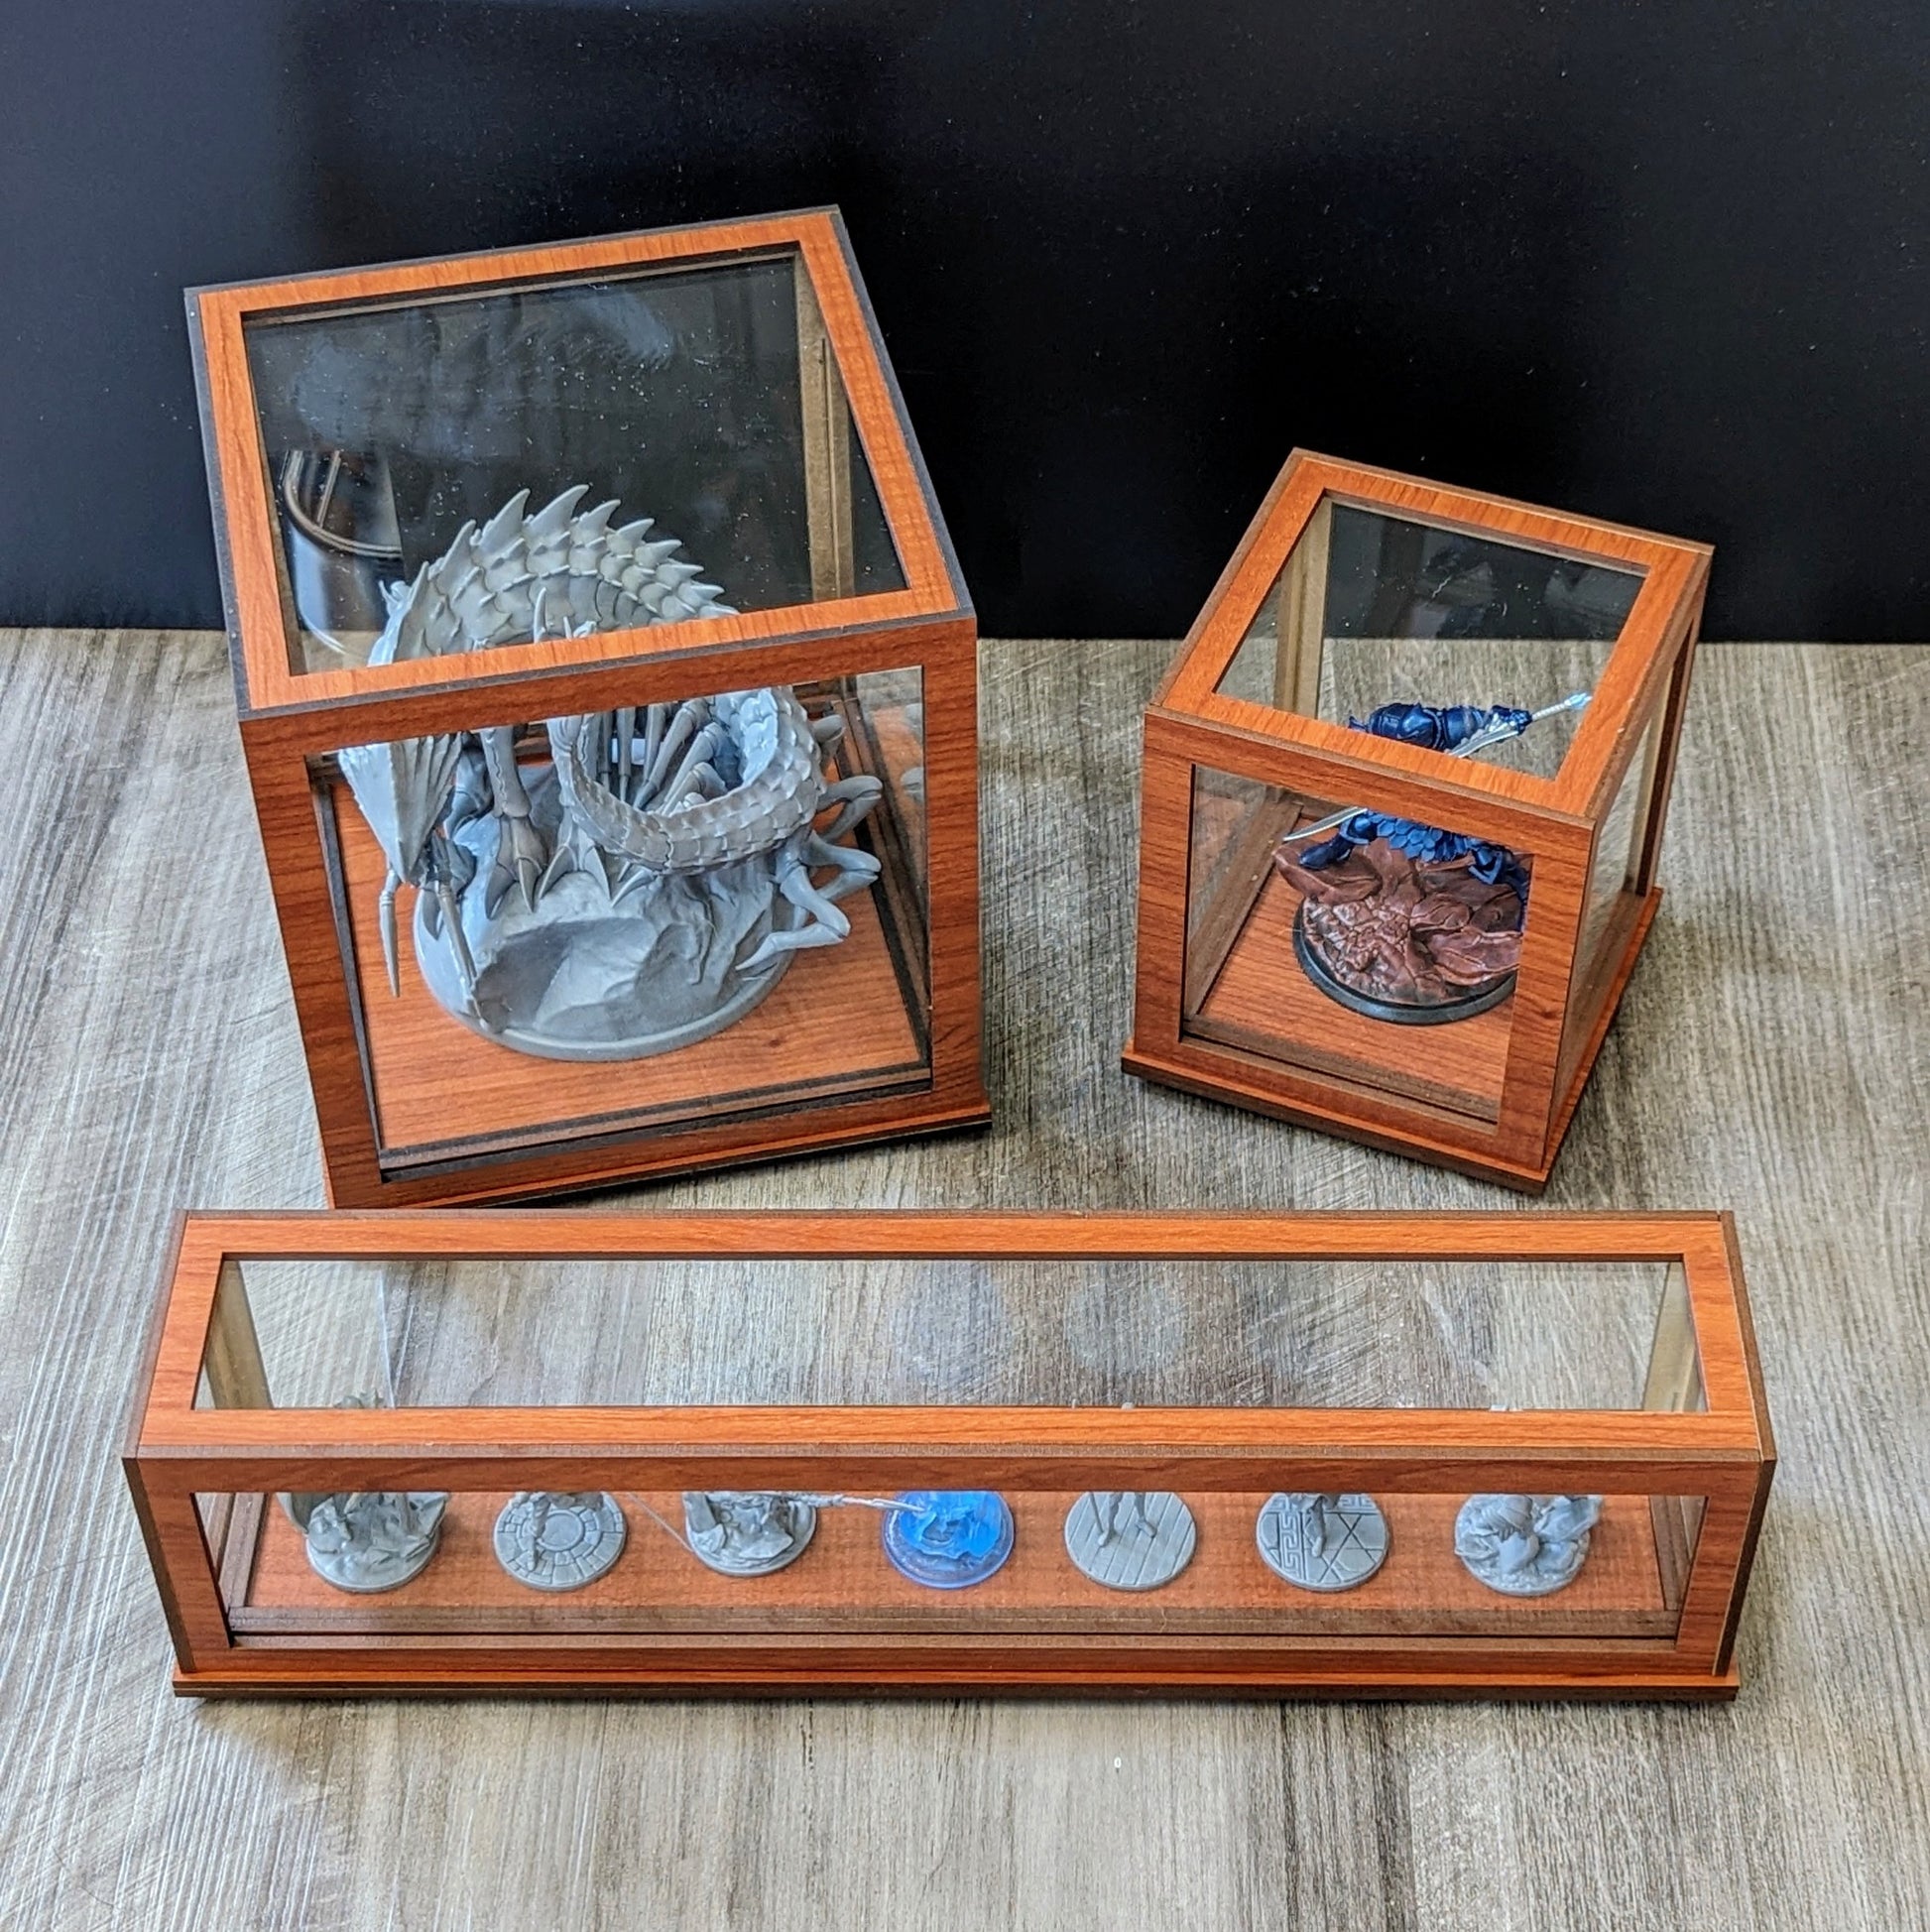 display case for stormlight archive TTRPG miniatures chasmfiend from brotherwise for brandon sanderson cosmere